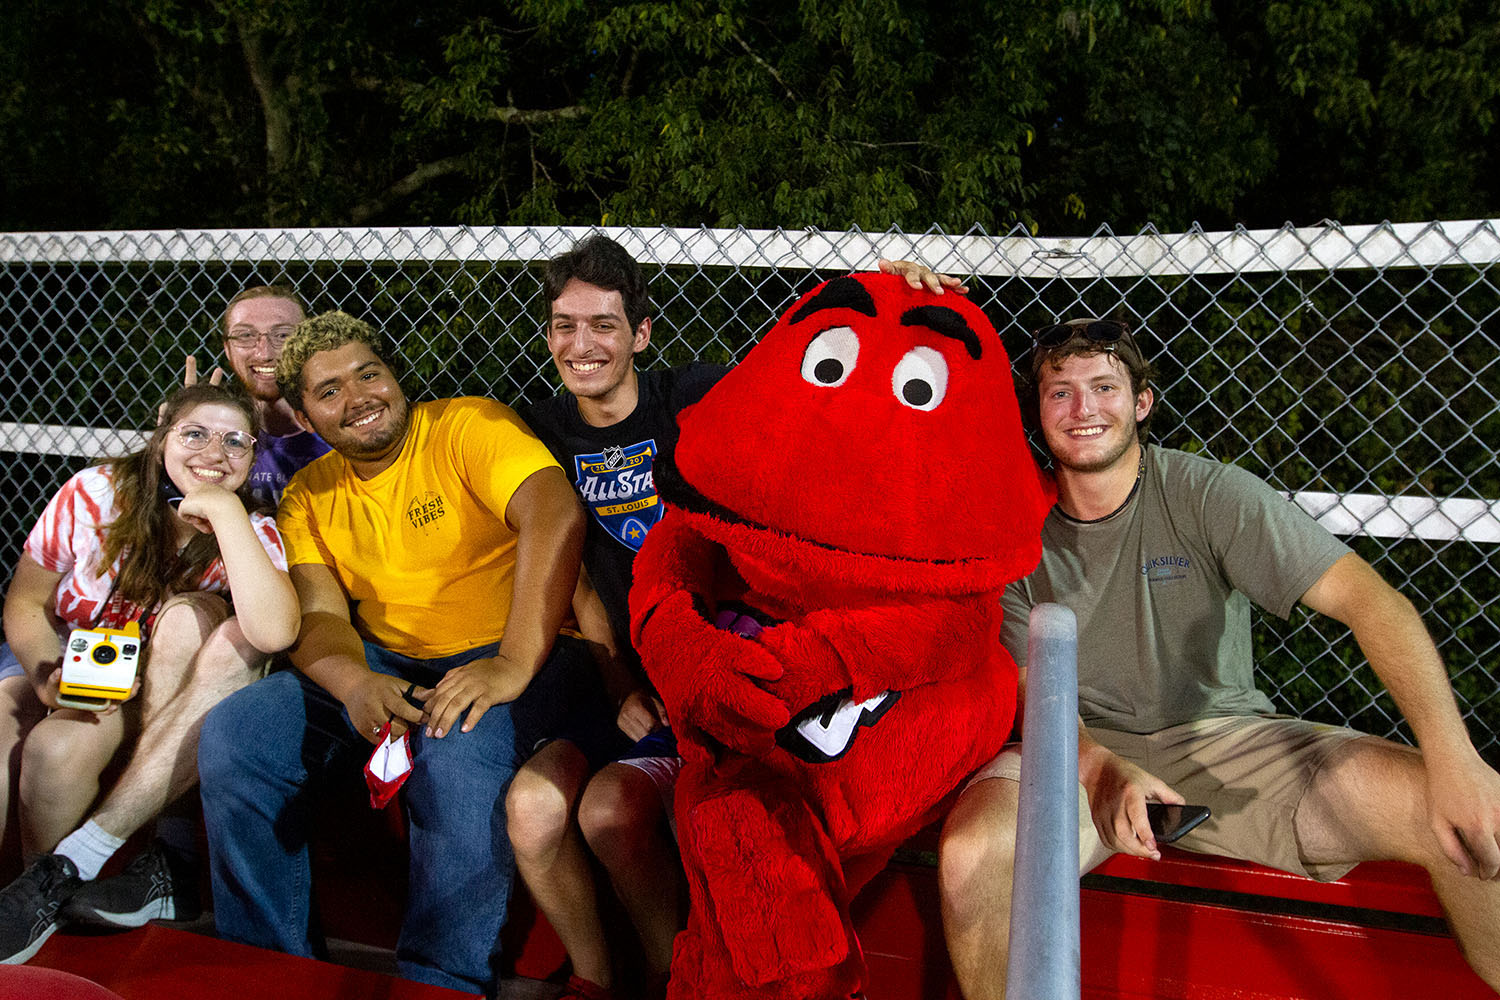 During a WKU soccer game, Big Red visited students in the School of Media LLC. Students went to the game together after a tailgate party outside their residence hall.